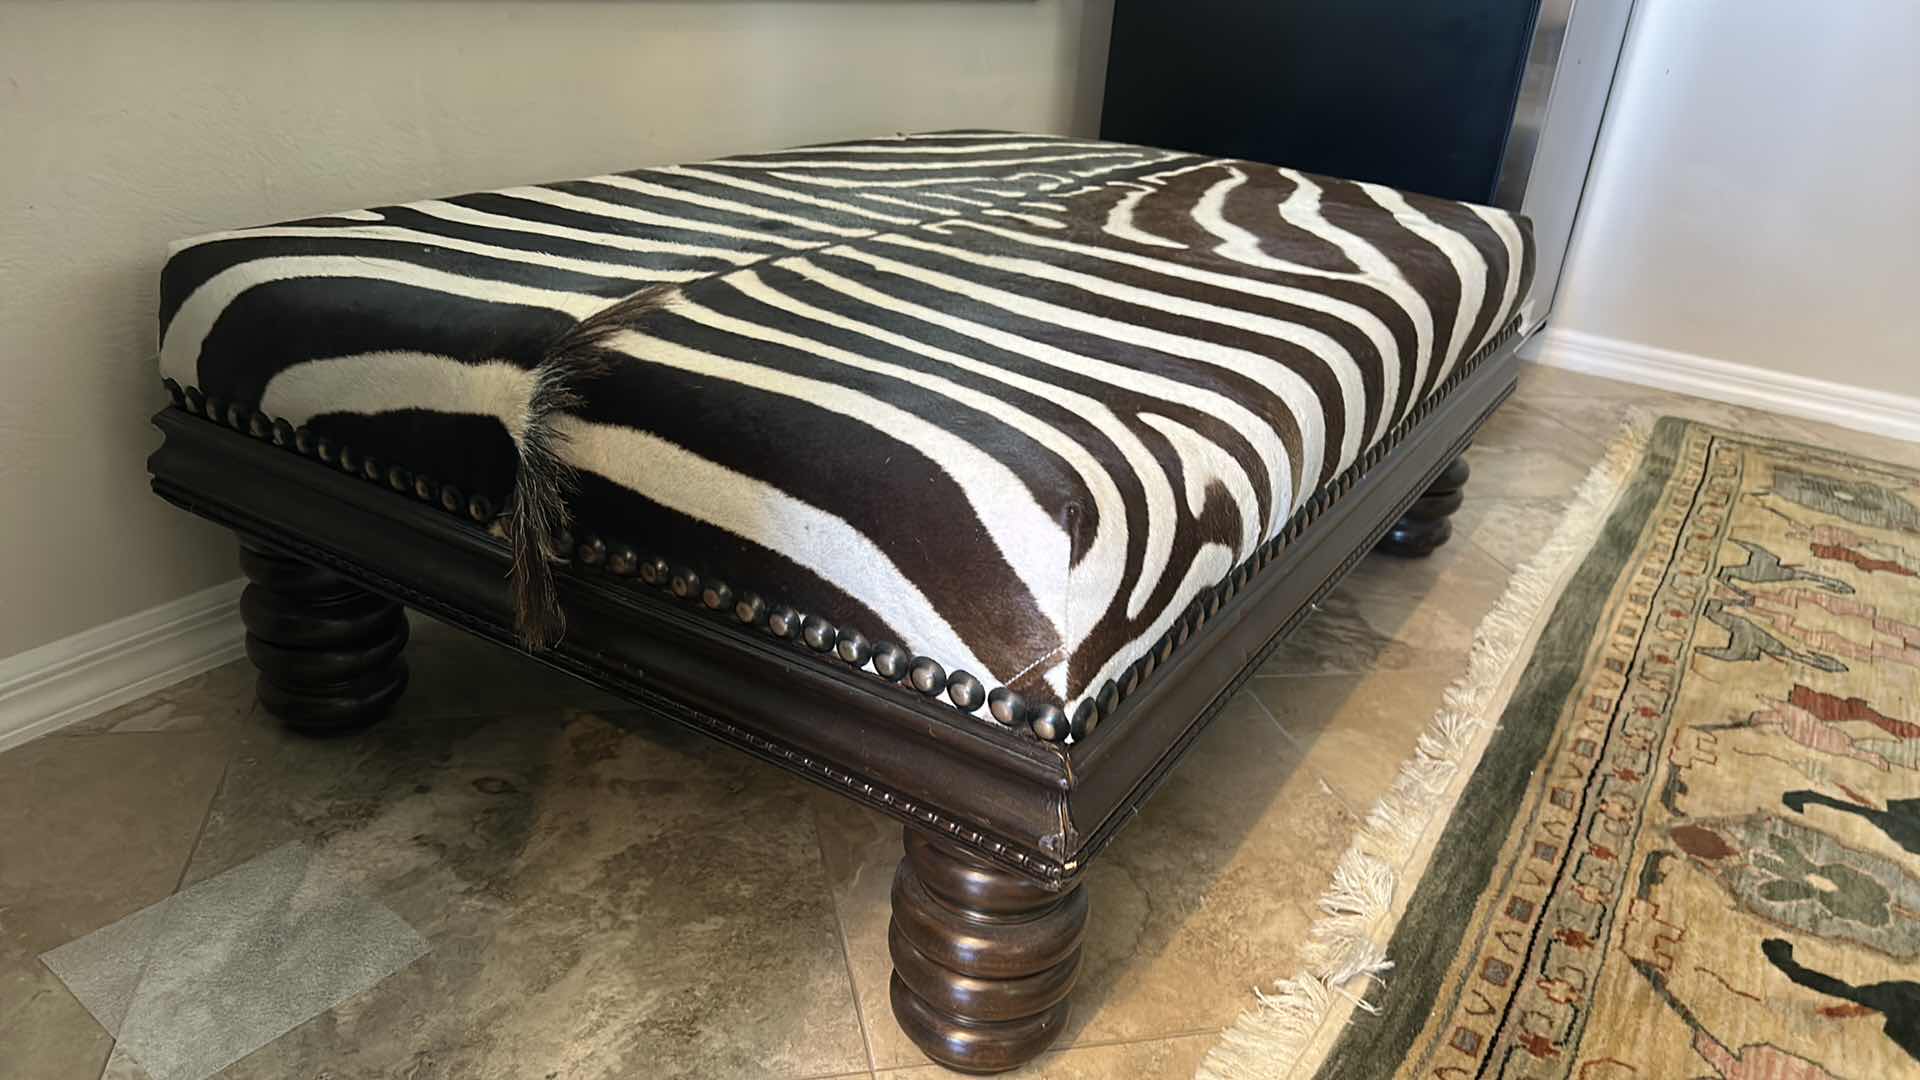 Photo 4 of REAL ZEBRA OTTOMAN/COCKTAIL TABLE 49” x 32” x 17”